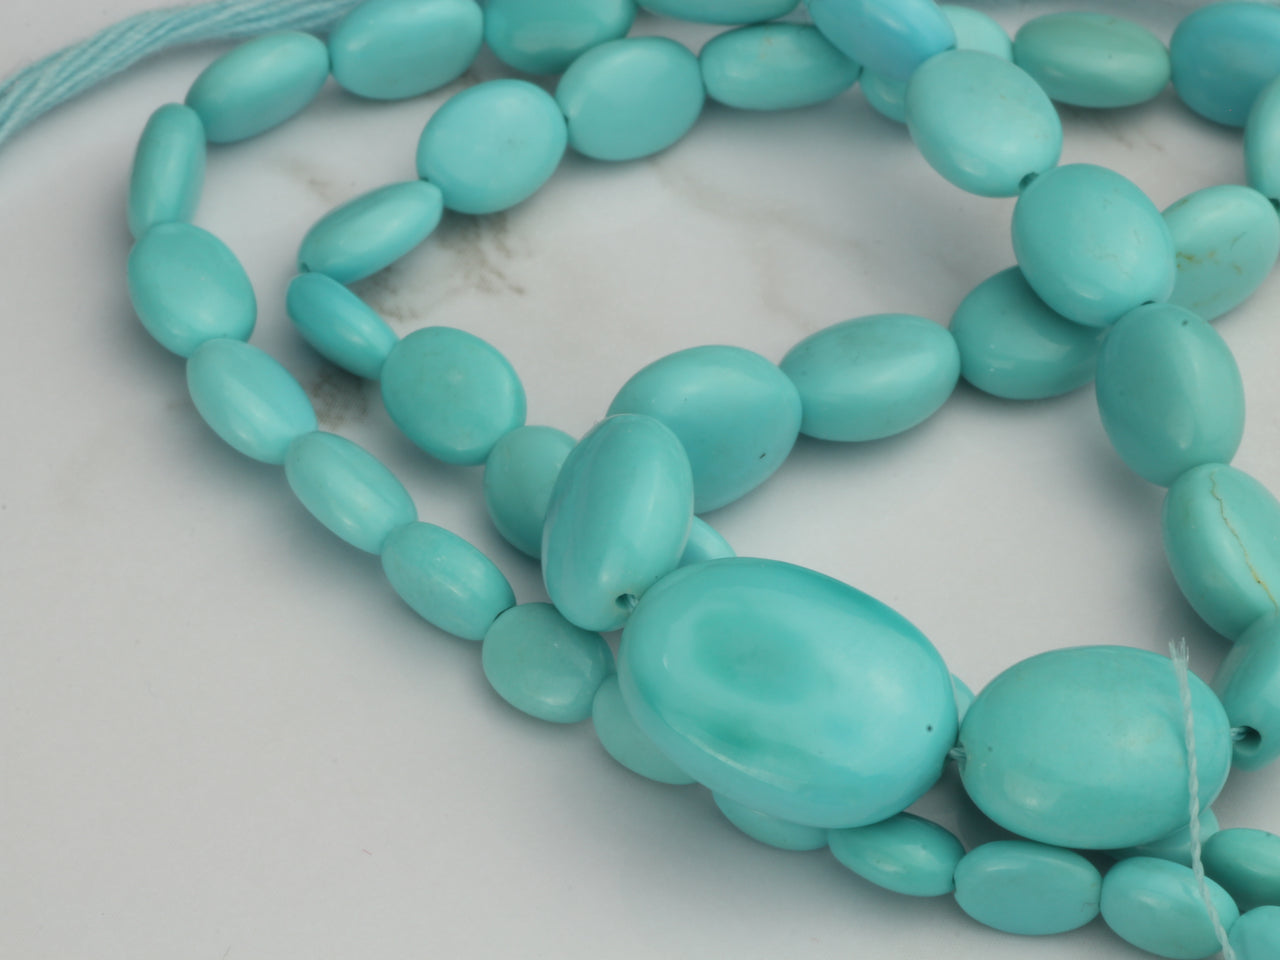 Sleeping Beauty Turquoise 7x5mm - 12x10mm Smooth Ovals Bead Strand